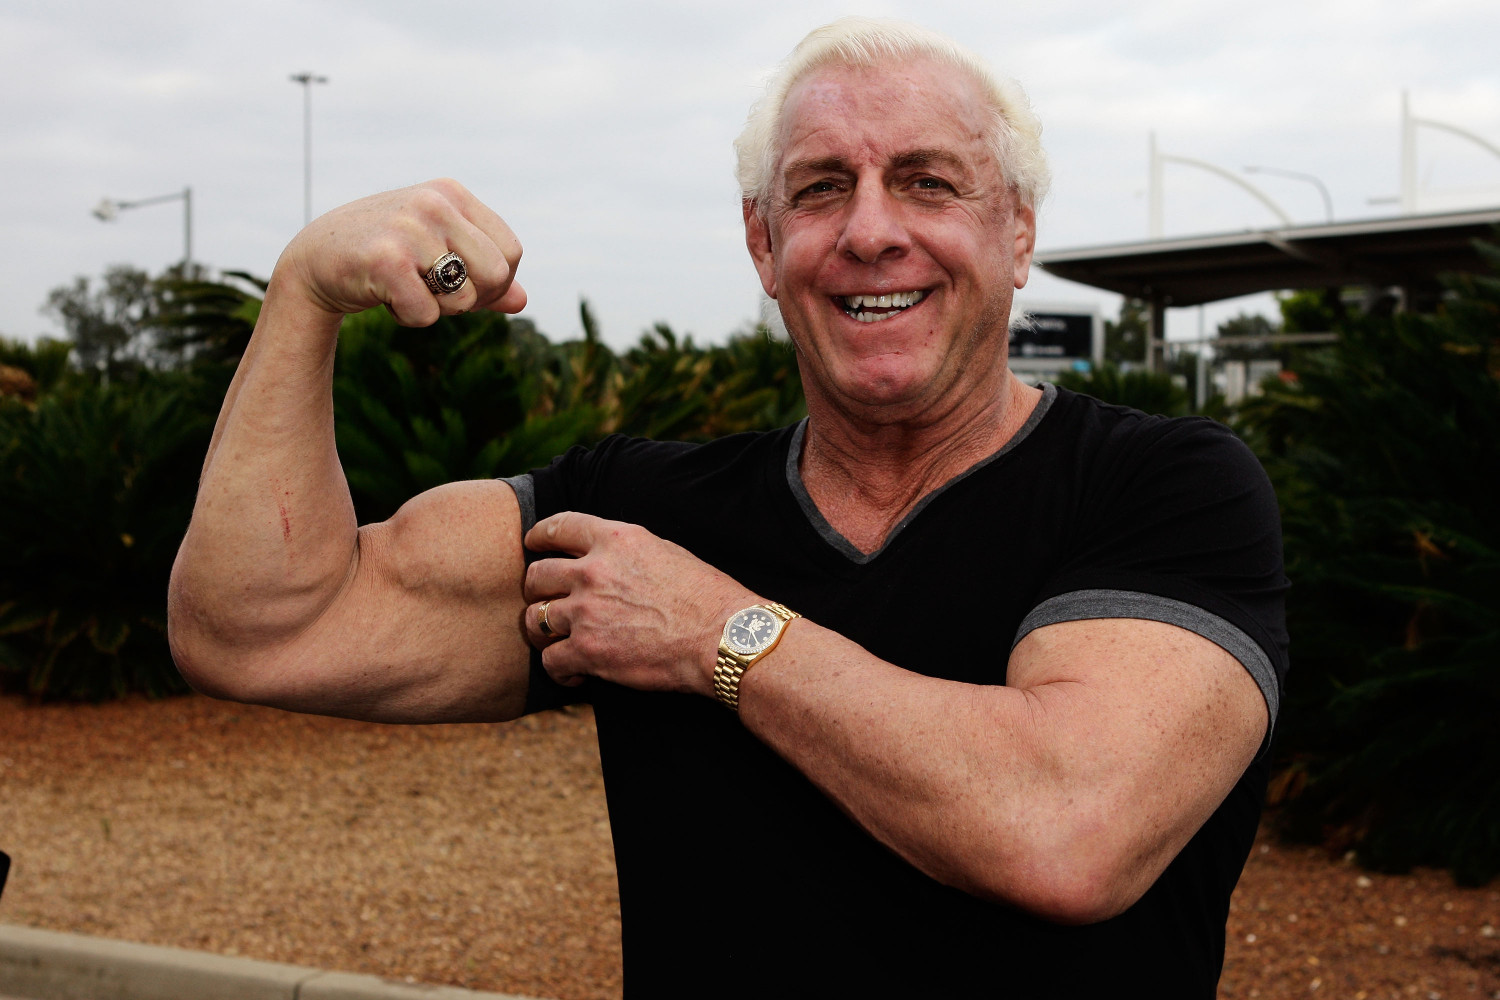 Wrestling Legend Ric Flair Returns From Hospital, Vows to ‘Woo’ Fans Again